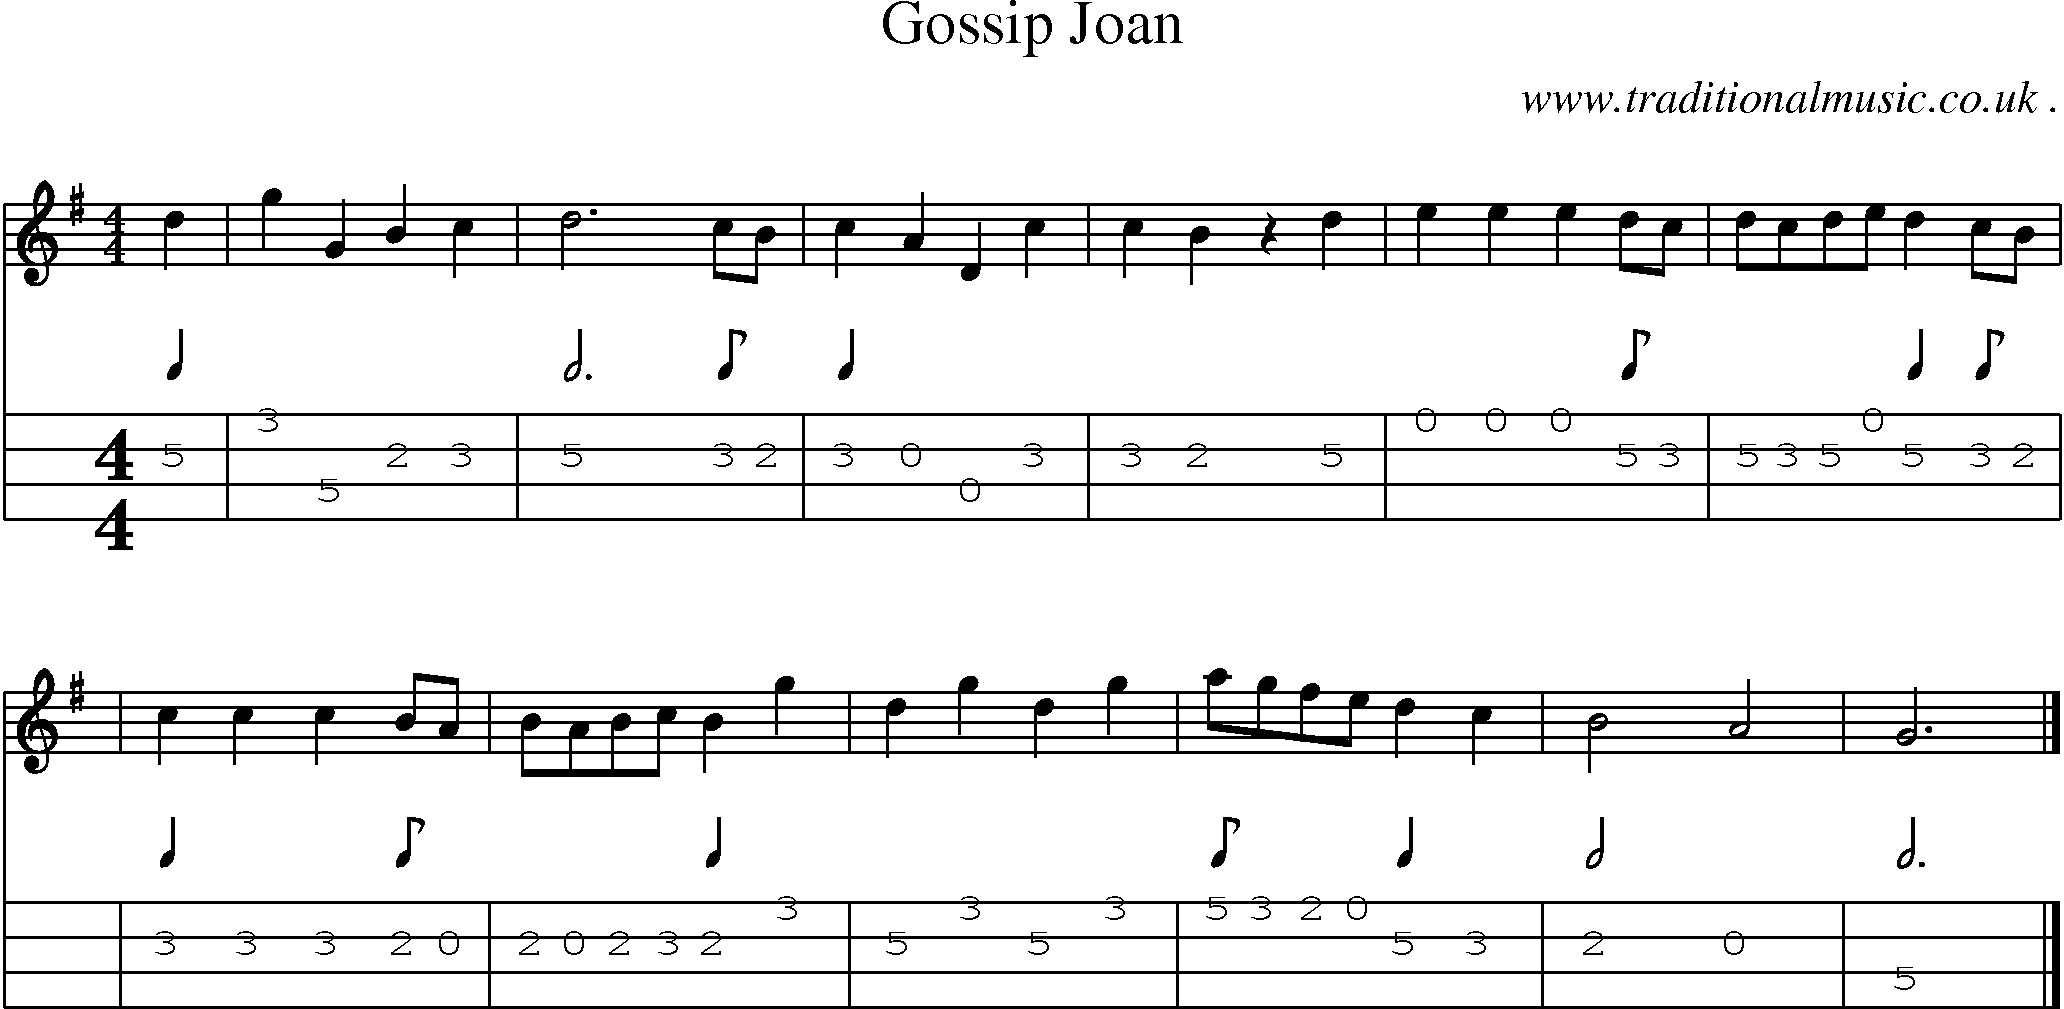 Sheet-music  score, Chords and Mandolin Tabs for Gossip Joan